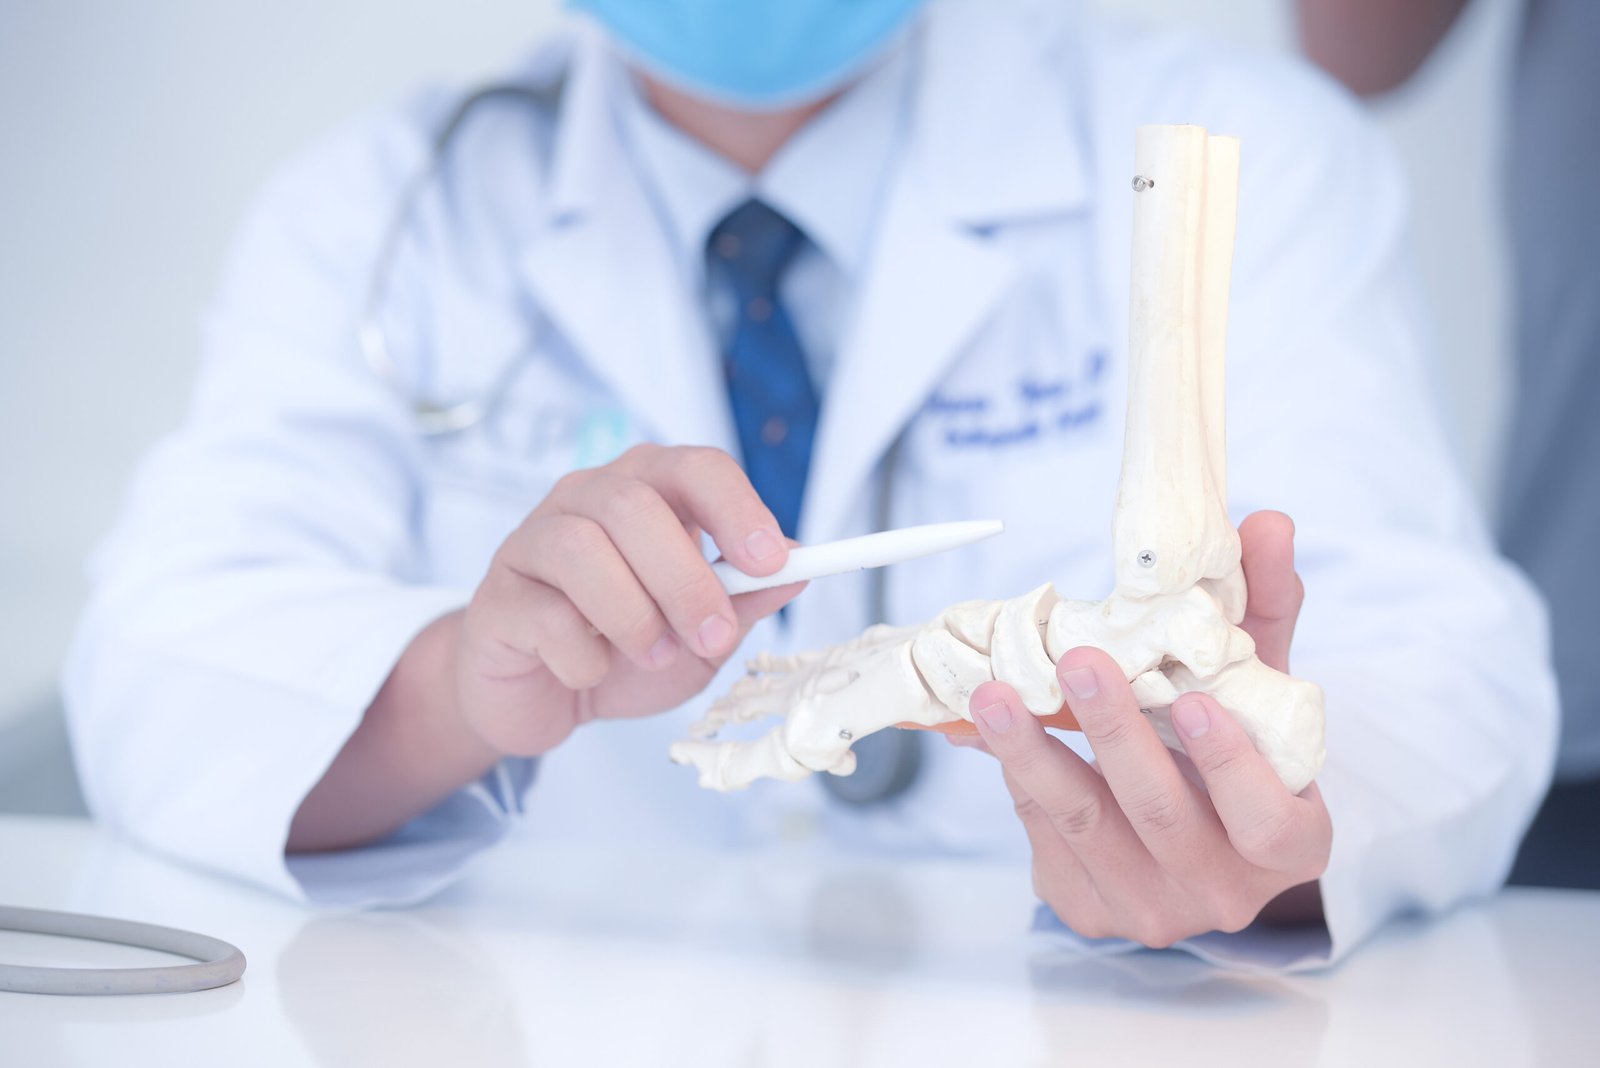 5 LATEST RESEARCH BREAKTHROUGHS IN ORTHOPEDICS